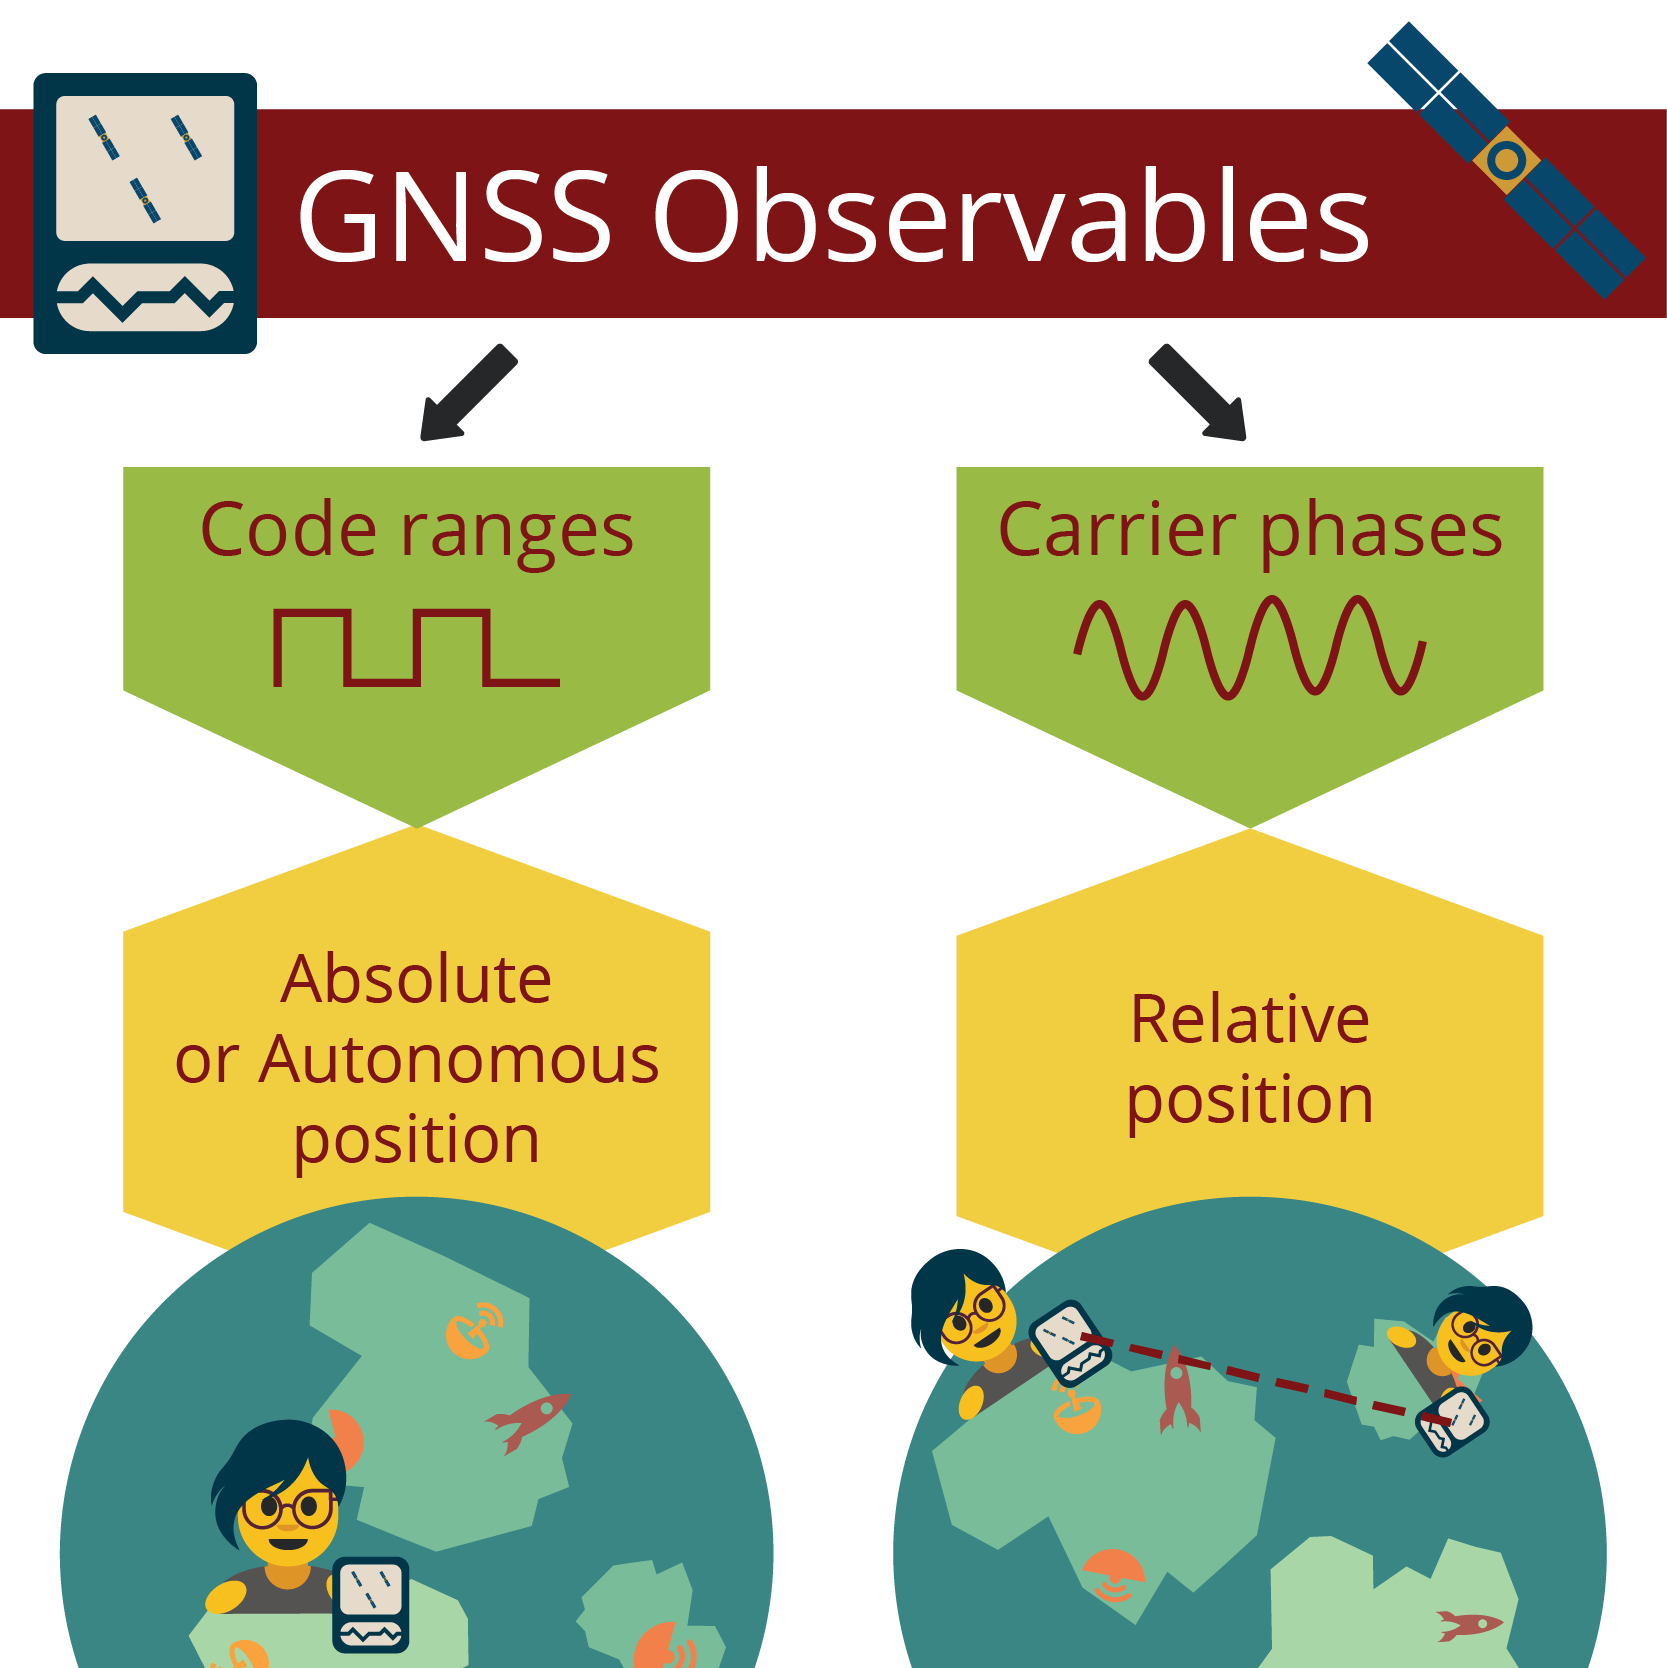 Diagram of GNSS observables, which is split into code ranges (that splits into absolute or autonomous position) or carrier phases, which splits into relative position